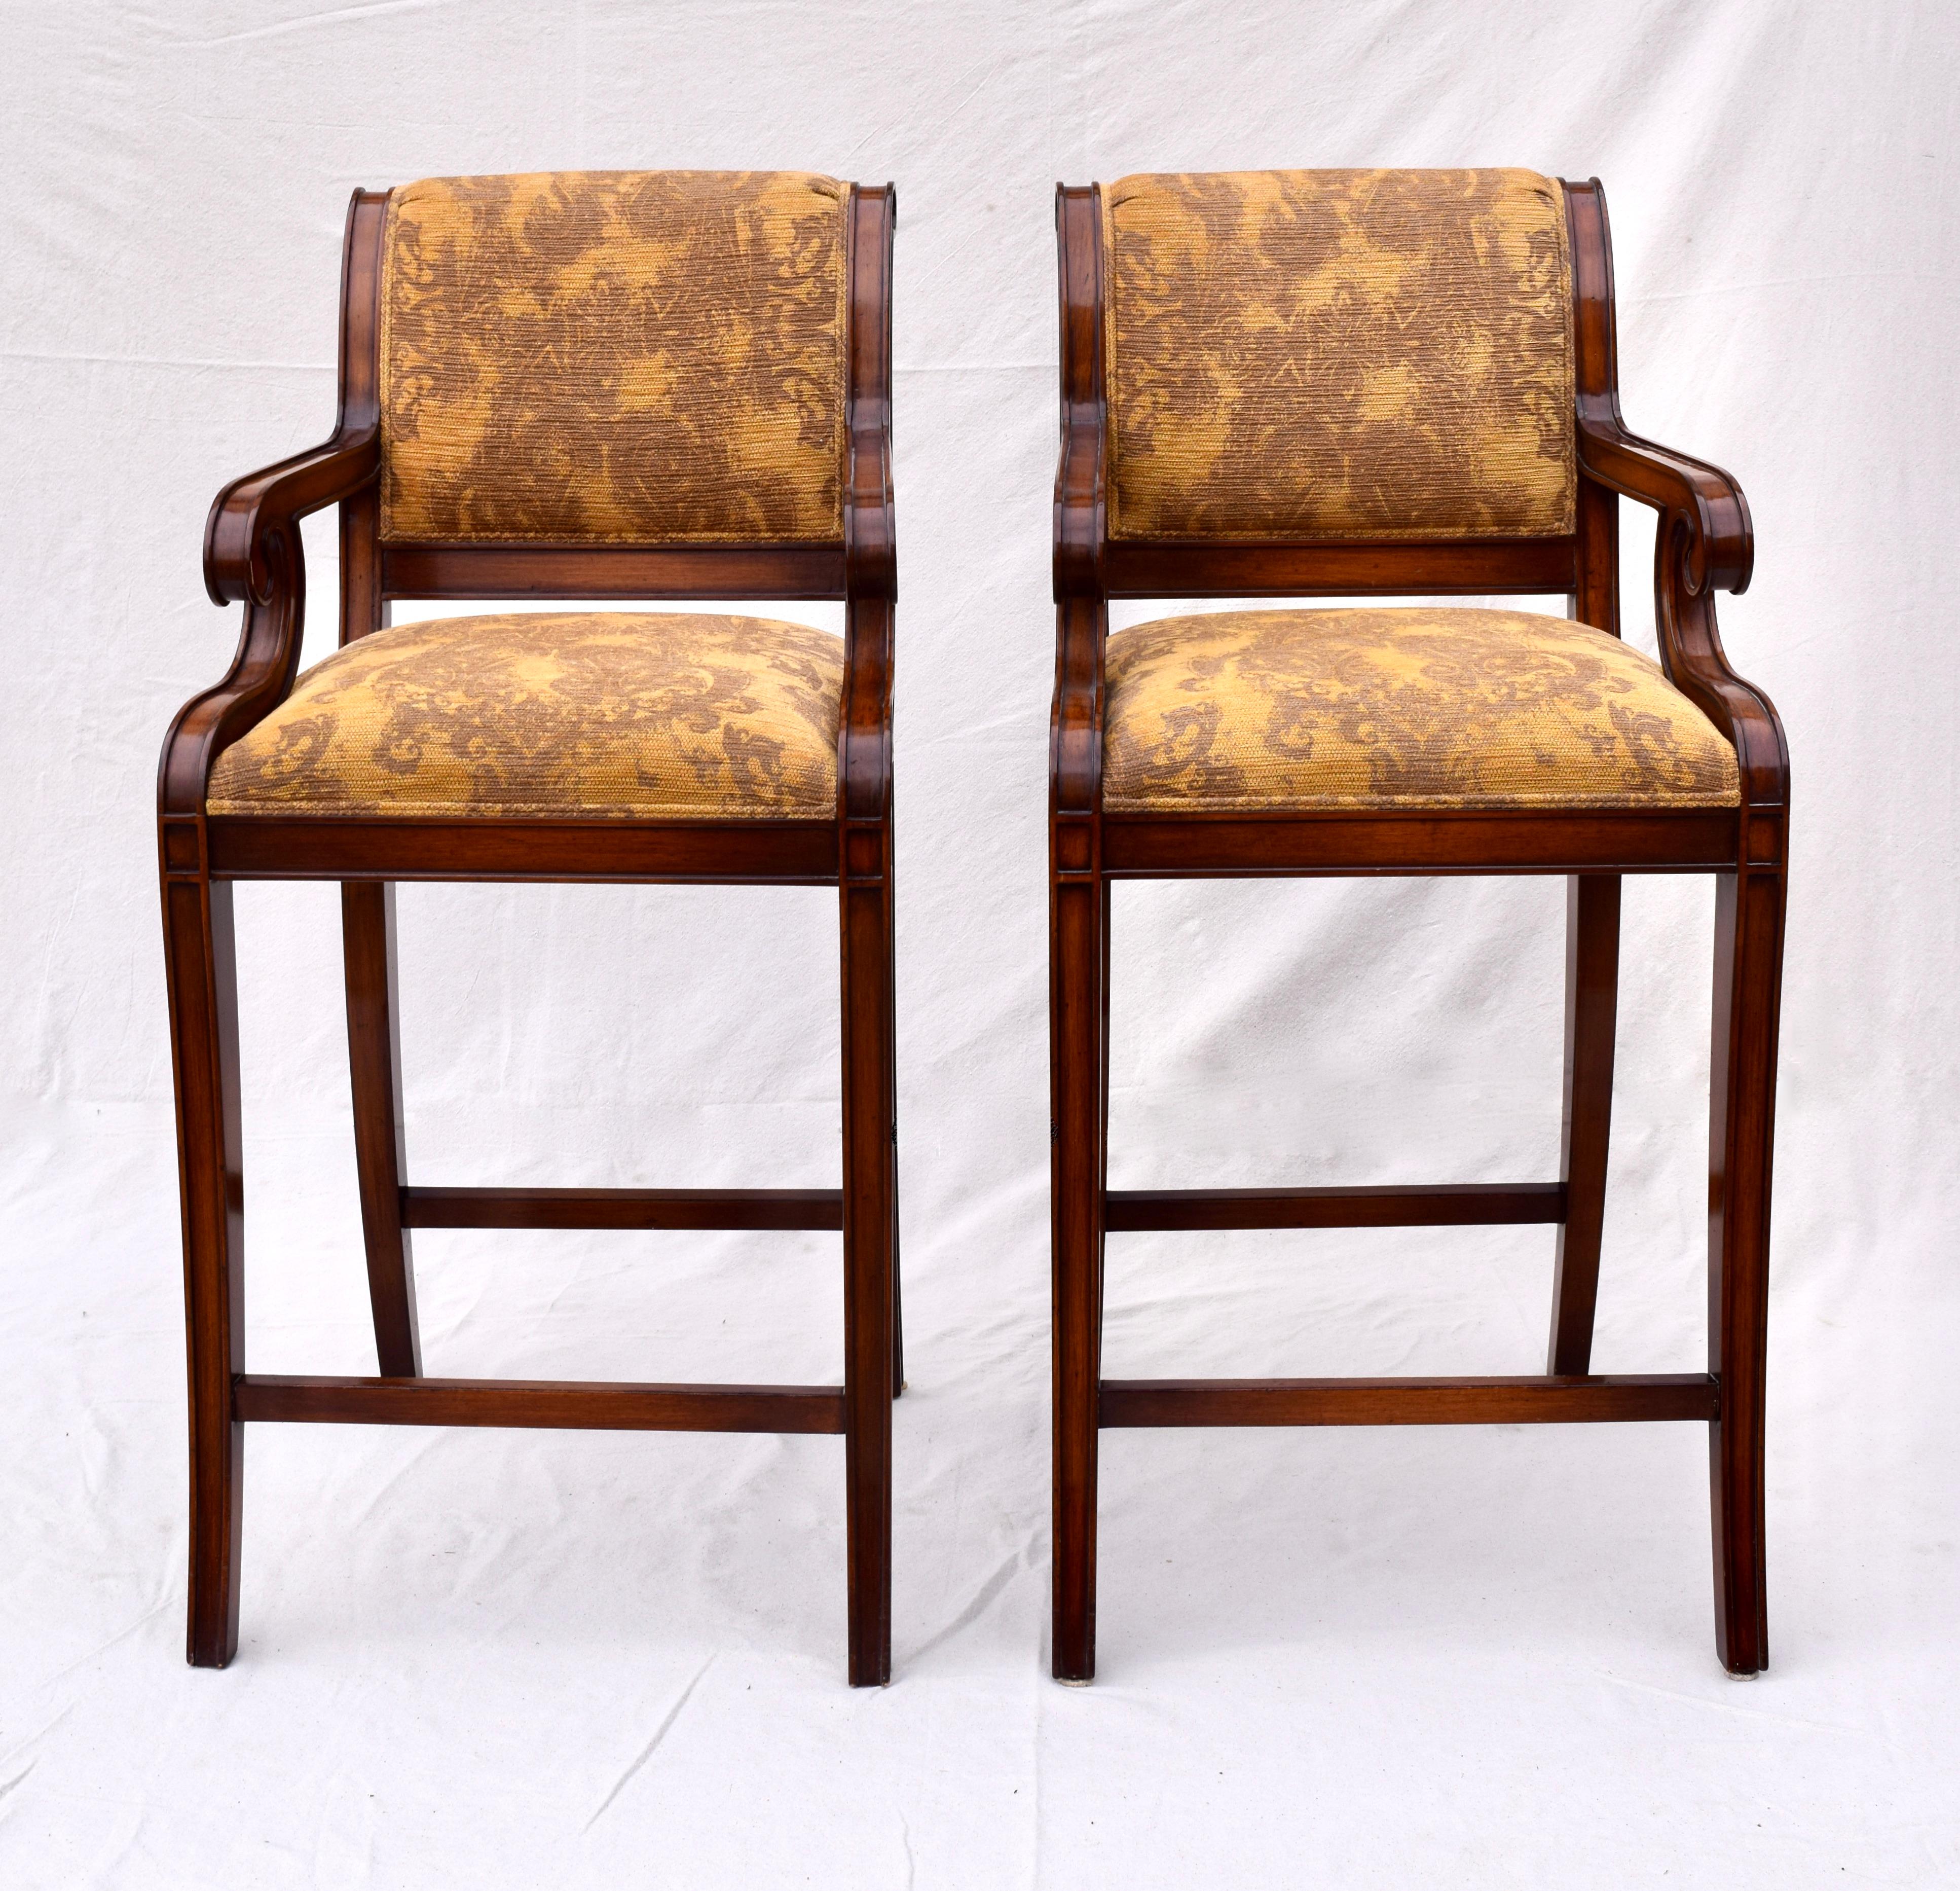 Upholstery Nancy Corzine Classic Regency Bar Stool Chairs, Pair For Sale